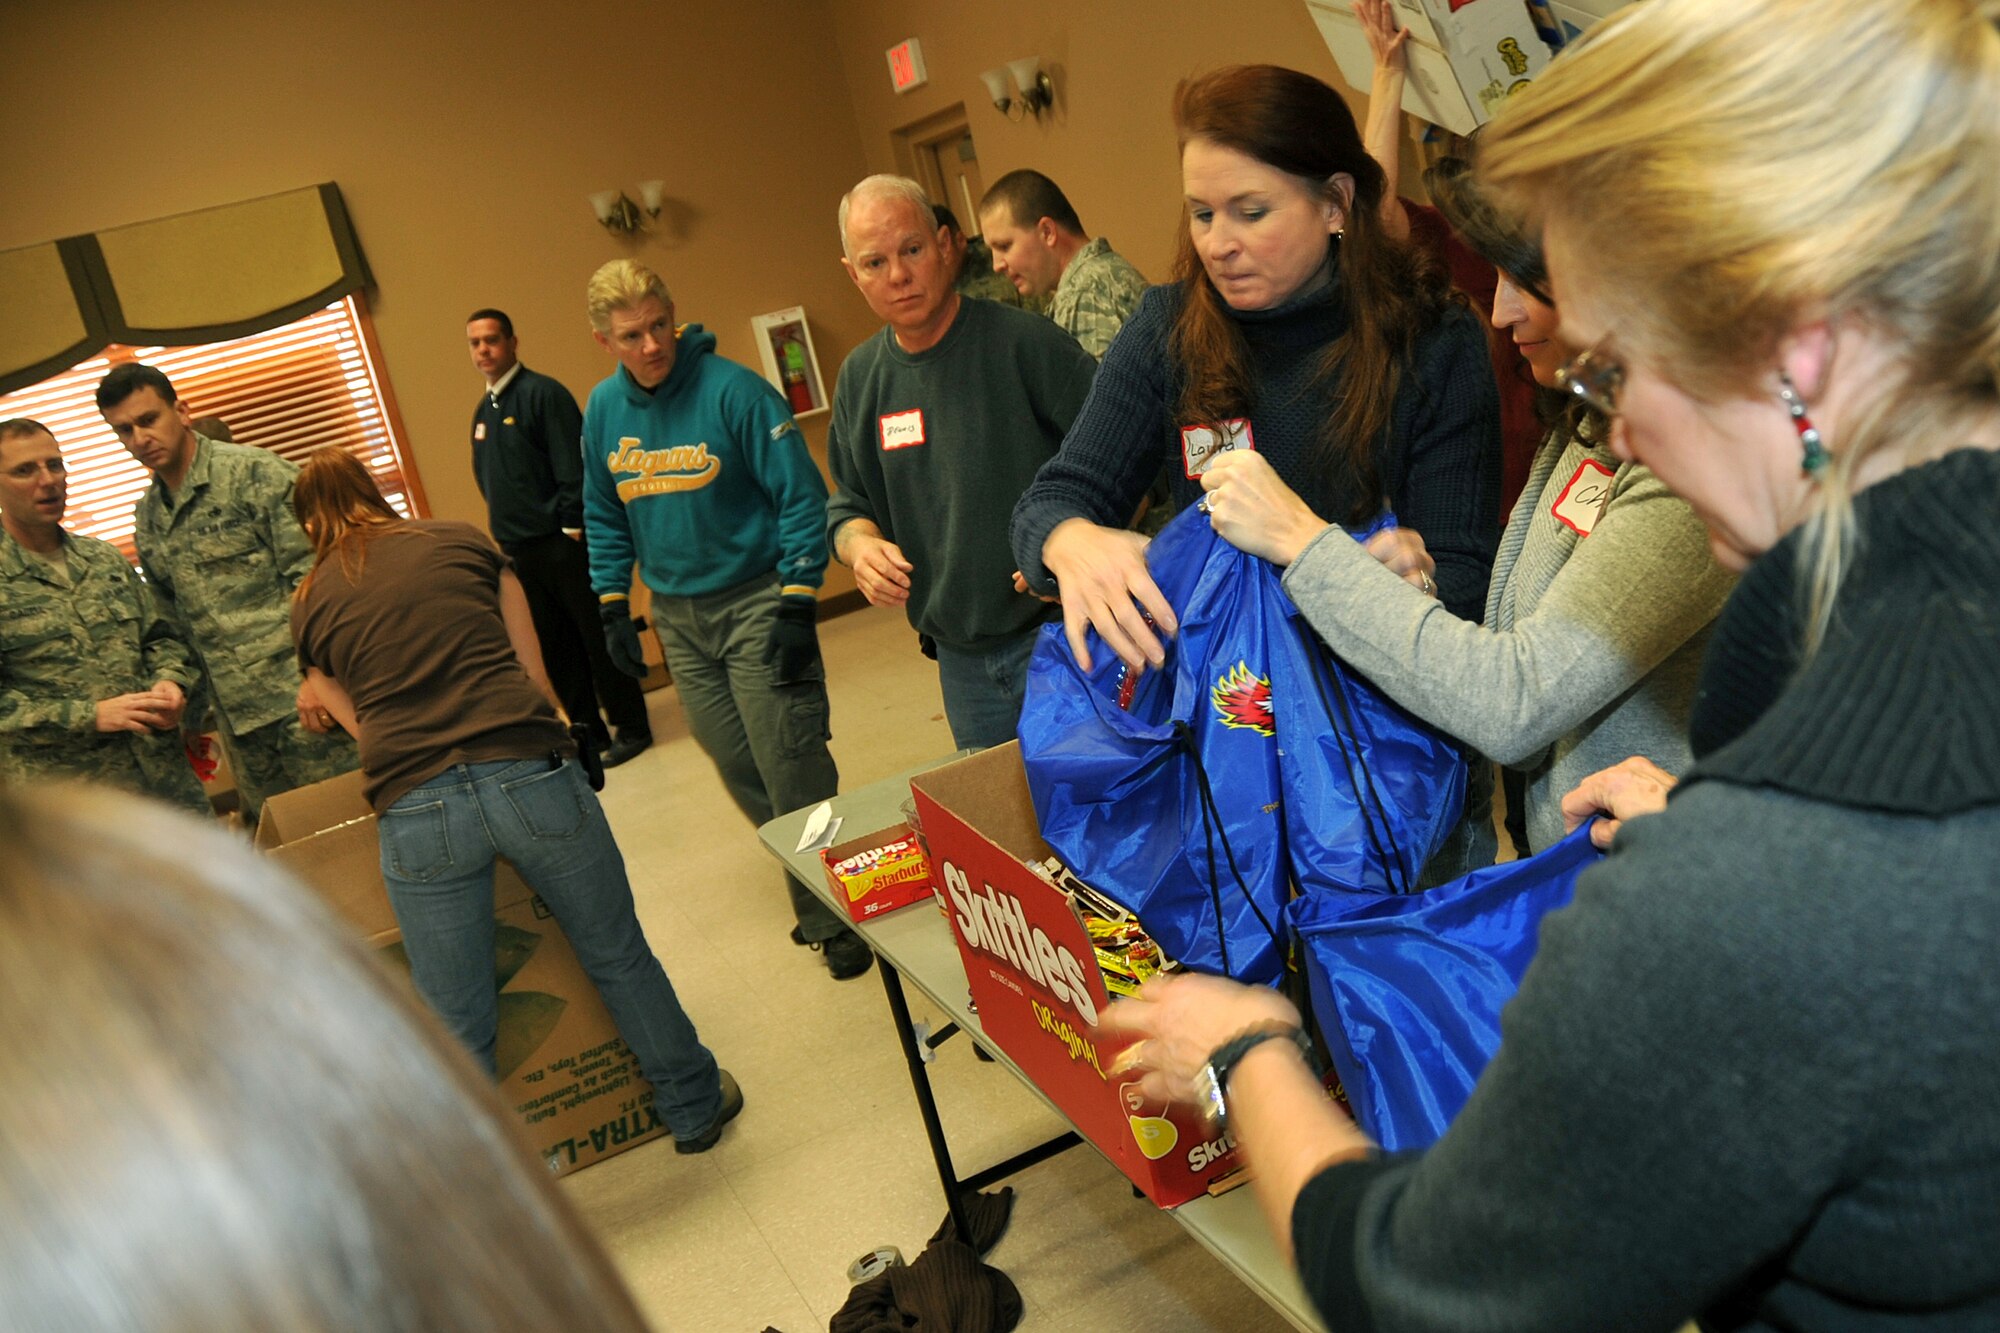 OFFUTT AIR FORCE BASE, Neb. - Laura Shanahan, wife of 55th Wing commander Brig. Gen. John N.T. Shanahan fill holiday cheer bags for the Bellevue Chamber of Commerce on Dec. 13. Military members and civilians were on hand to fill snack bags up for local dorm residents at Offutt. U.S. Air Force Photo by Jeff W. Gates (Released)